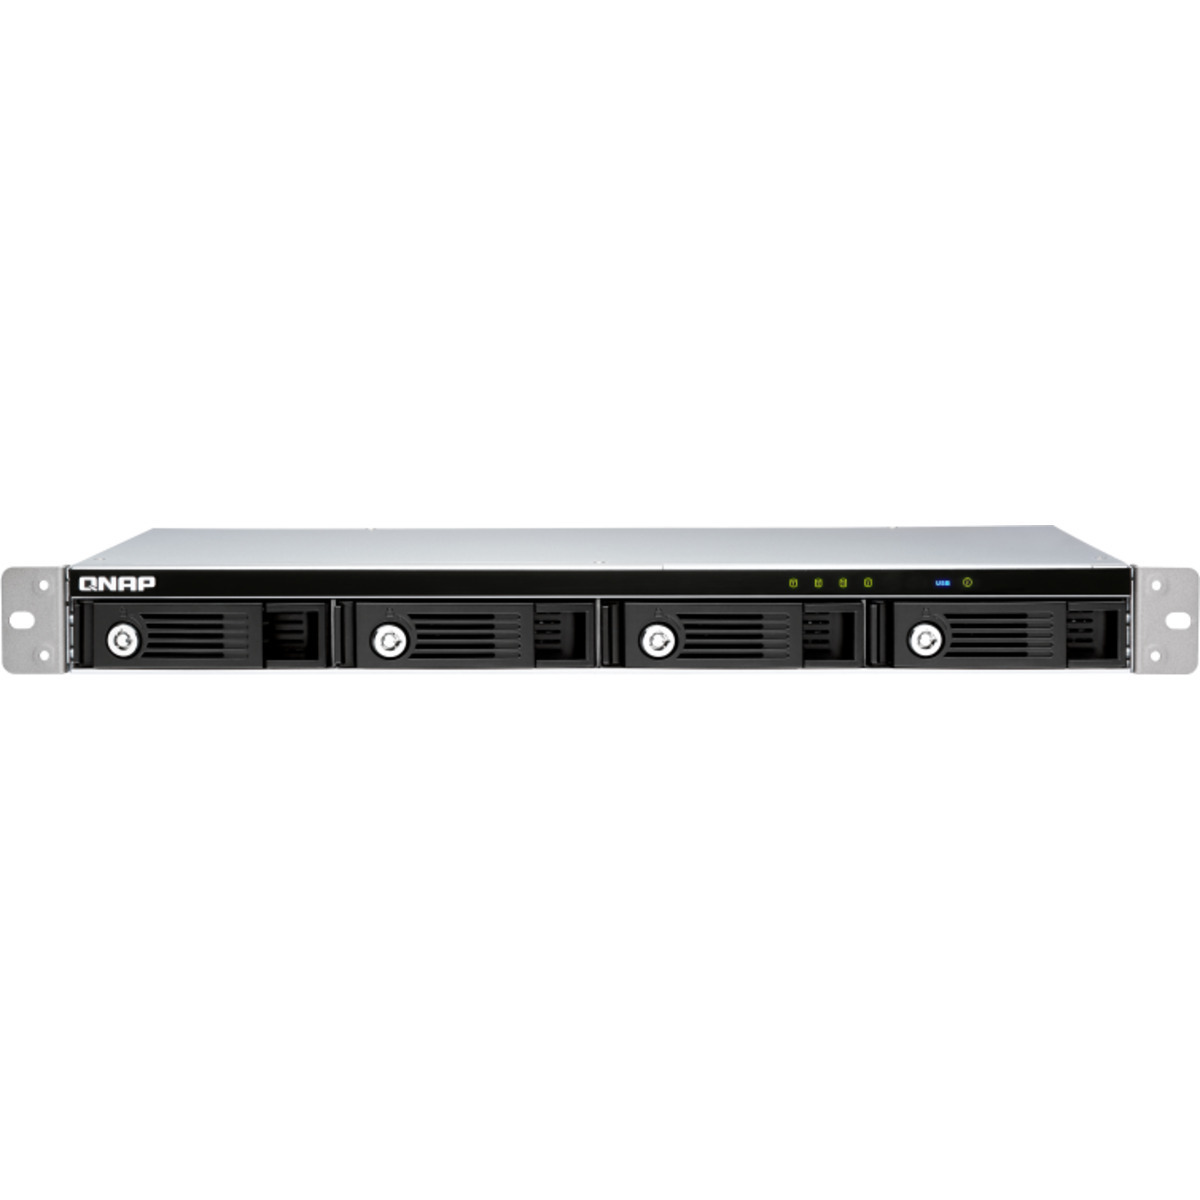 QNAP TR-004U External Expansion Drive RackMount 4-Bay Multimedia / Power User / Business Expansion Enclosure Burn-In Tested Configurations TR-004U External Expansion Drive